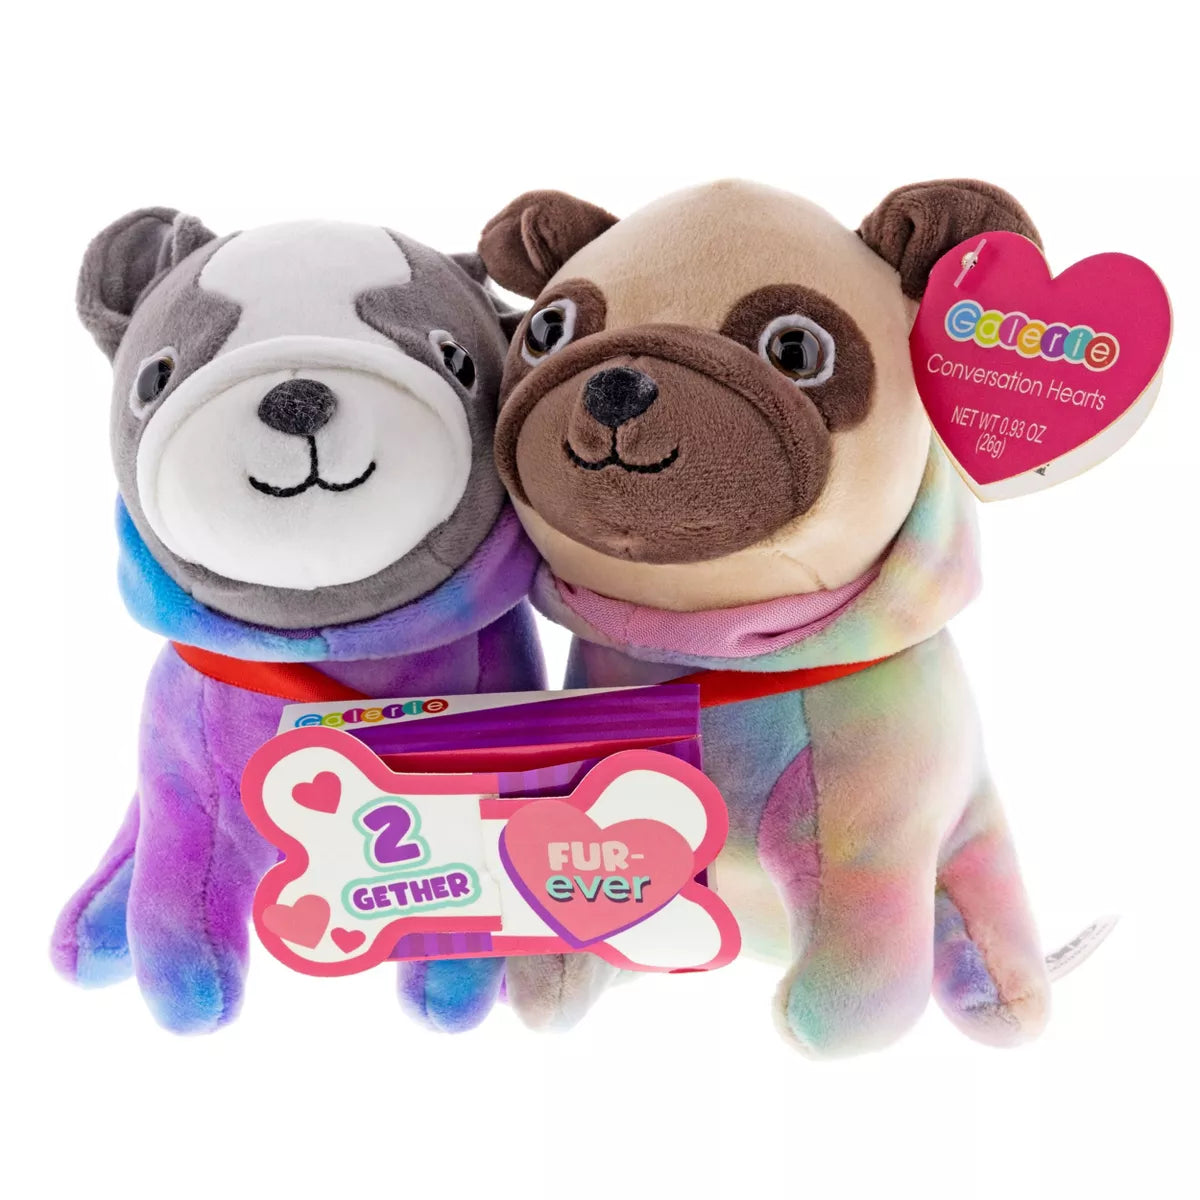 Galerie Valentine's Plush Dogs with Candy - 0.93oz